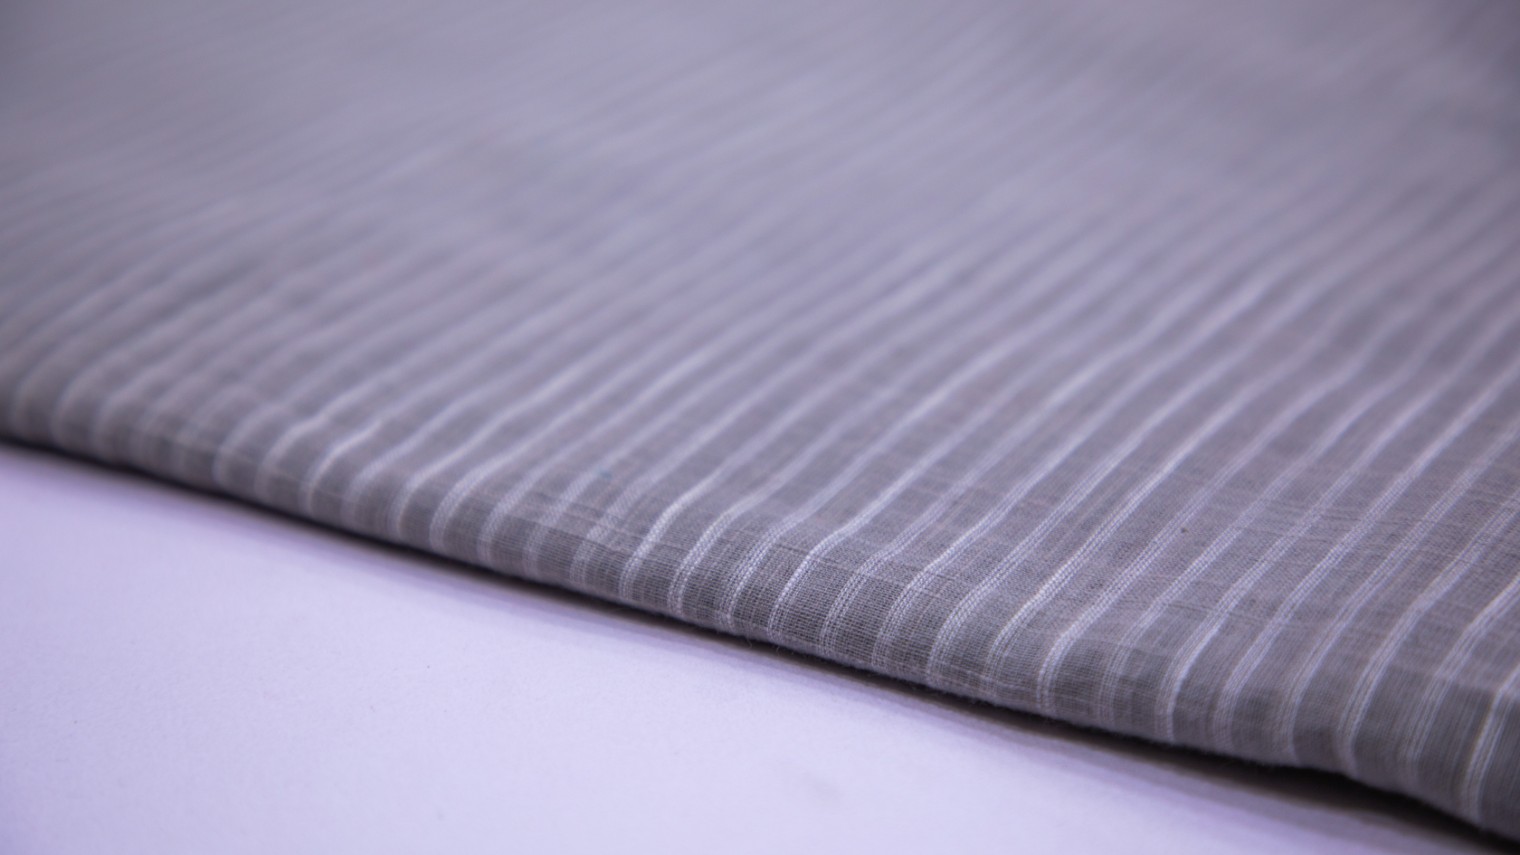 FOG GREY COLOR SOUTH COTTON HANDLOOM WHITE THIN STRIPES WEAVE FABRIC - 4244